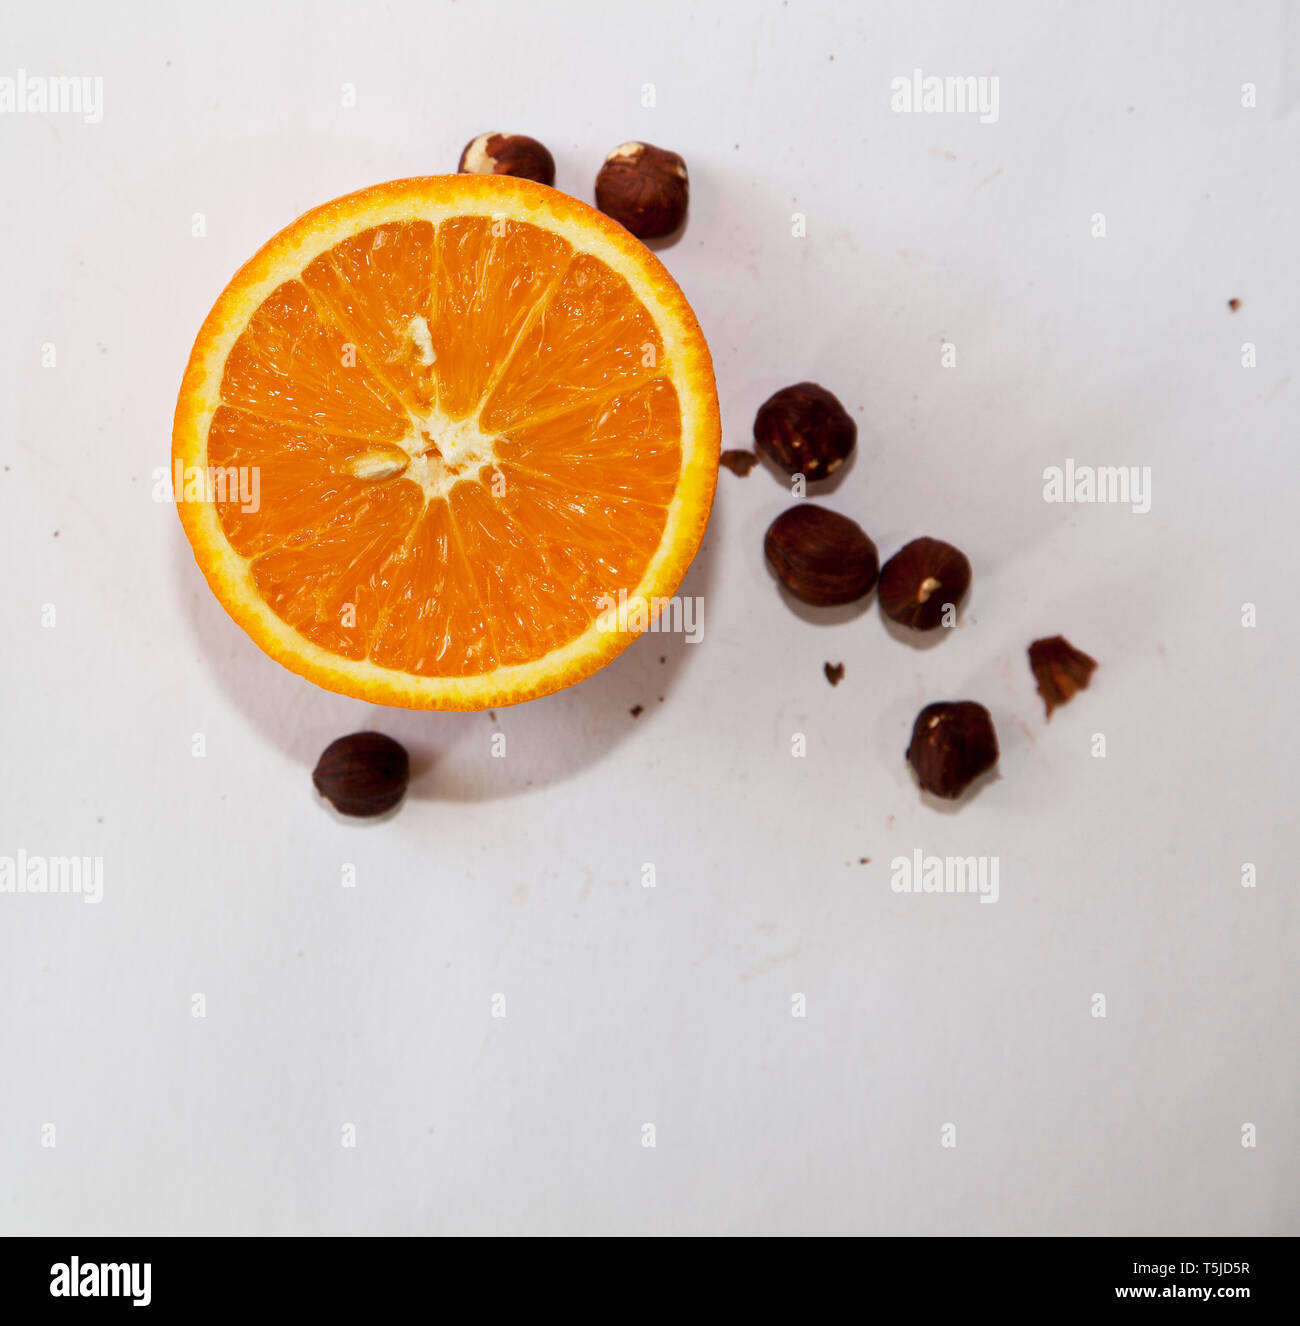 Healthy foods full of vitamins on the table Stock Photo